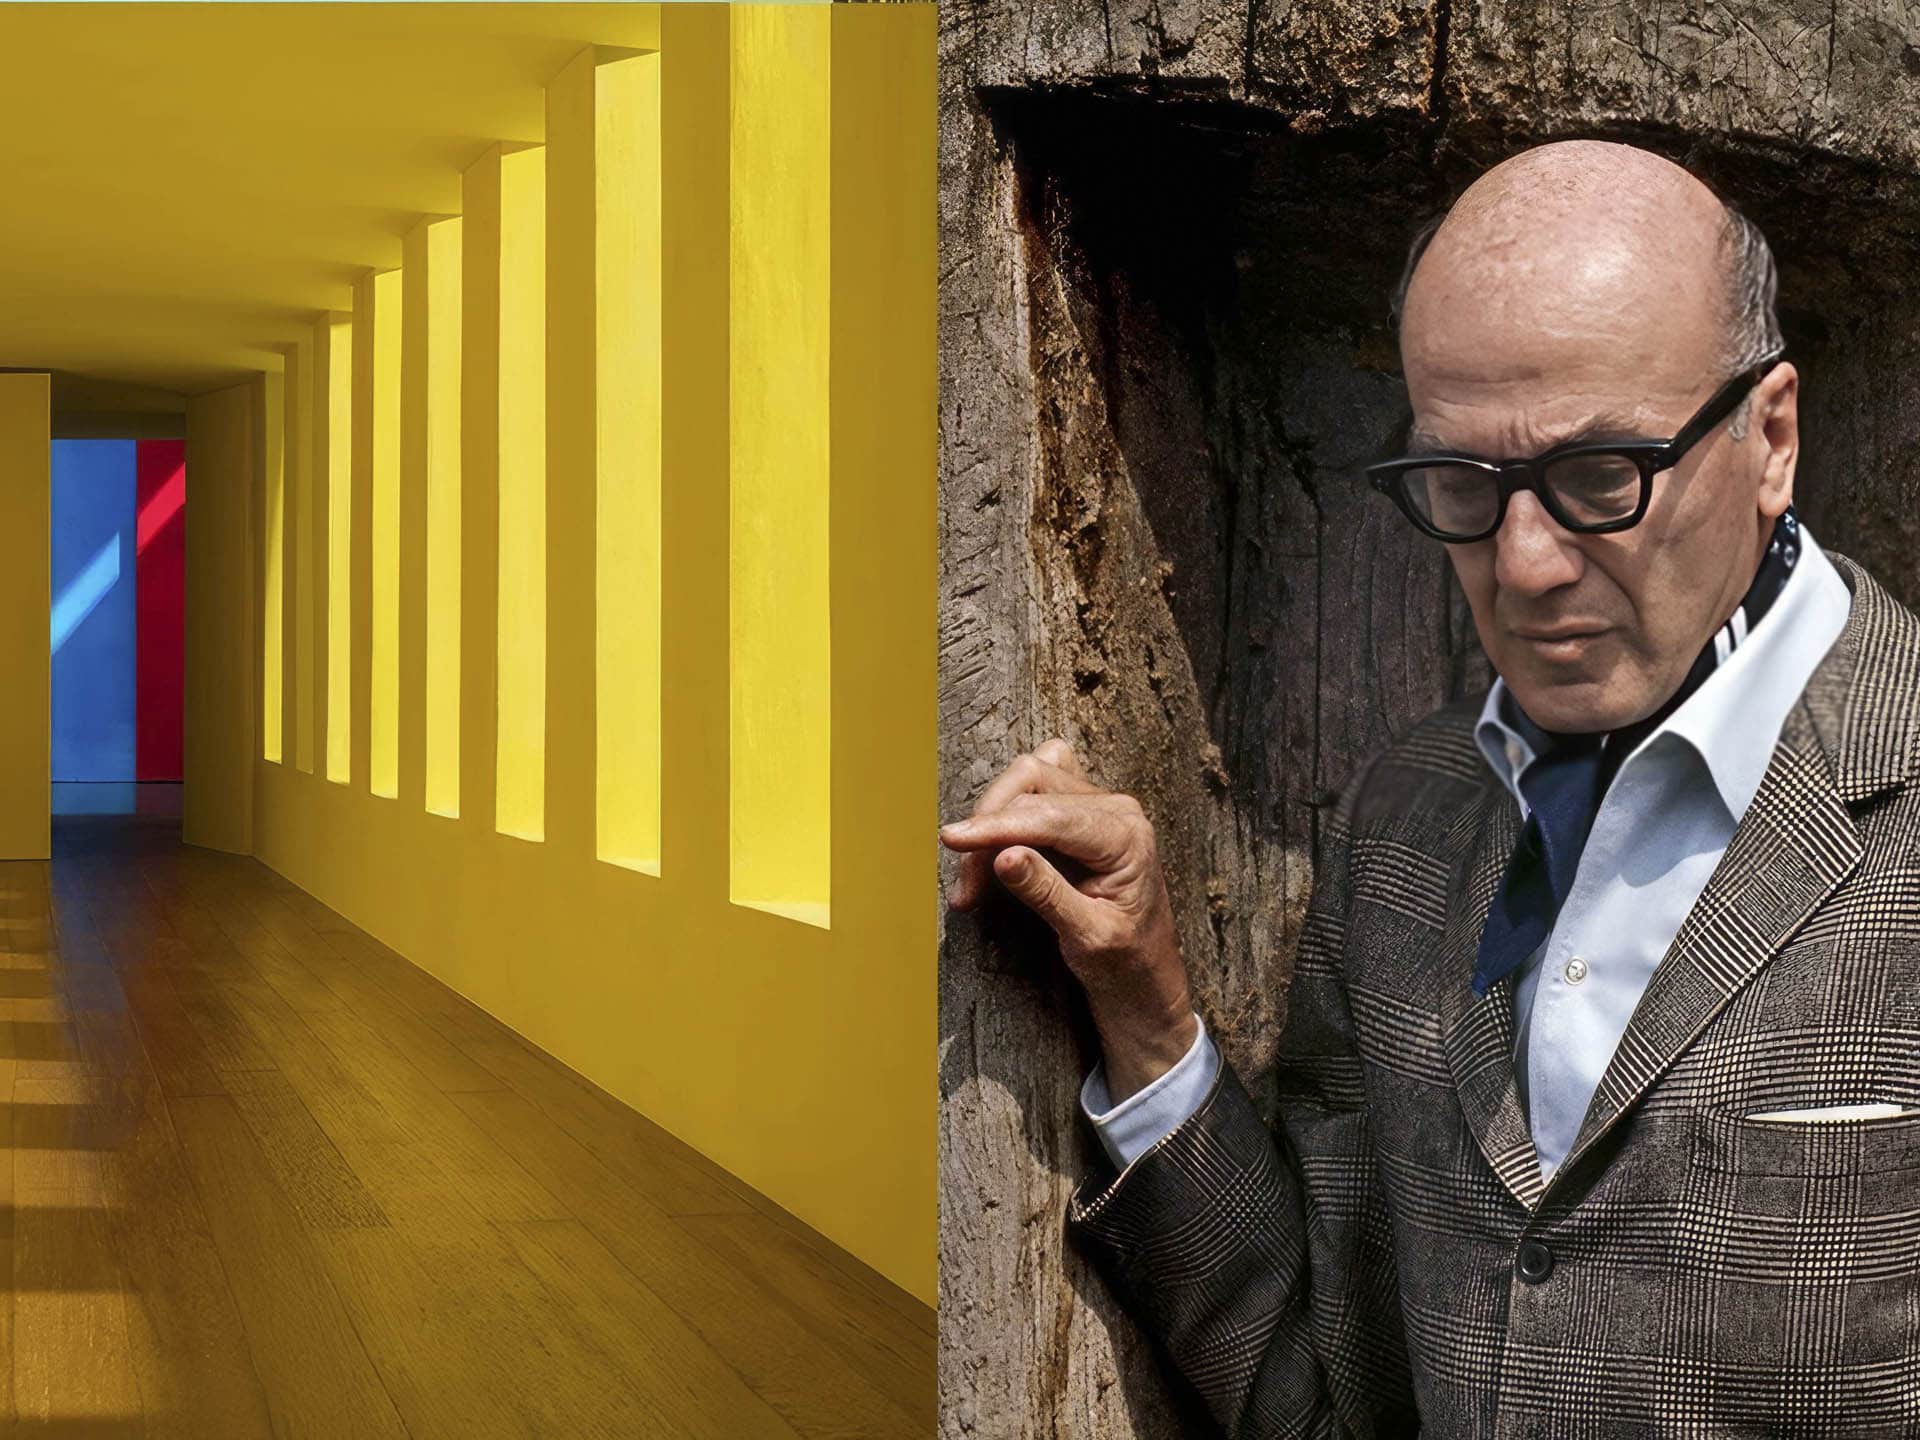 Luis Barragán, one of the most influential architects of the 20th century (Photo: Rethinking the Future)